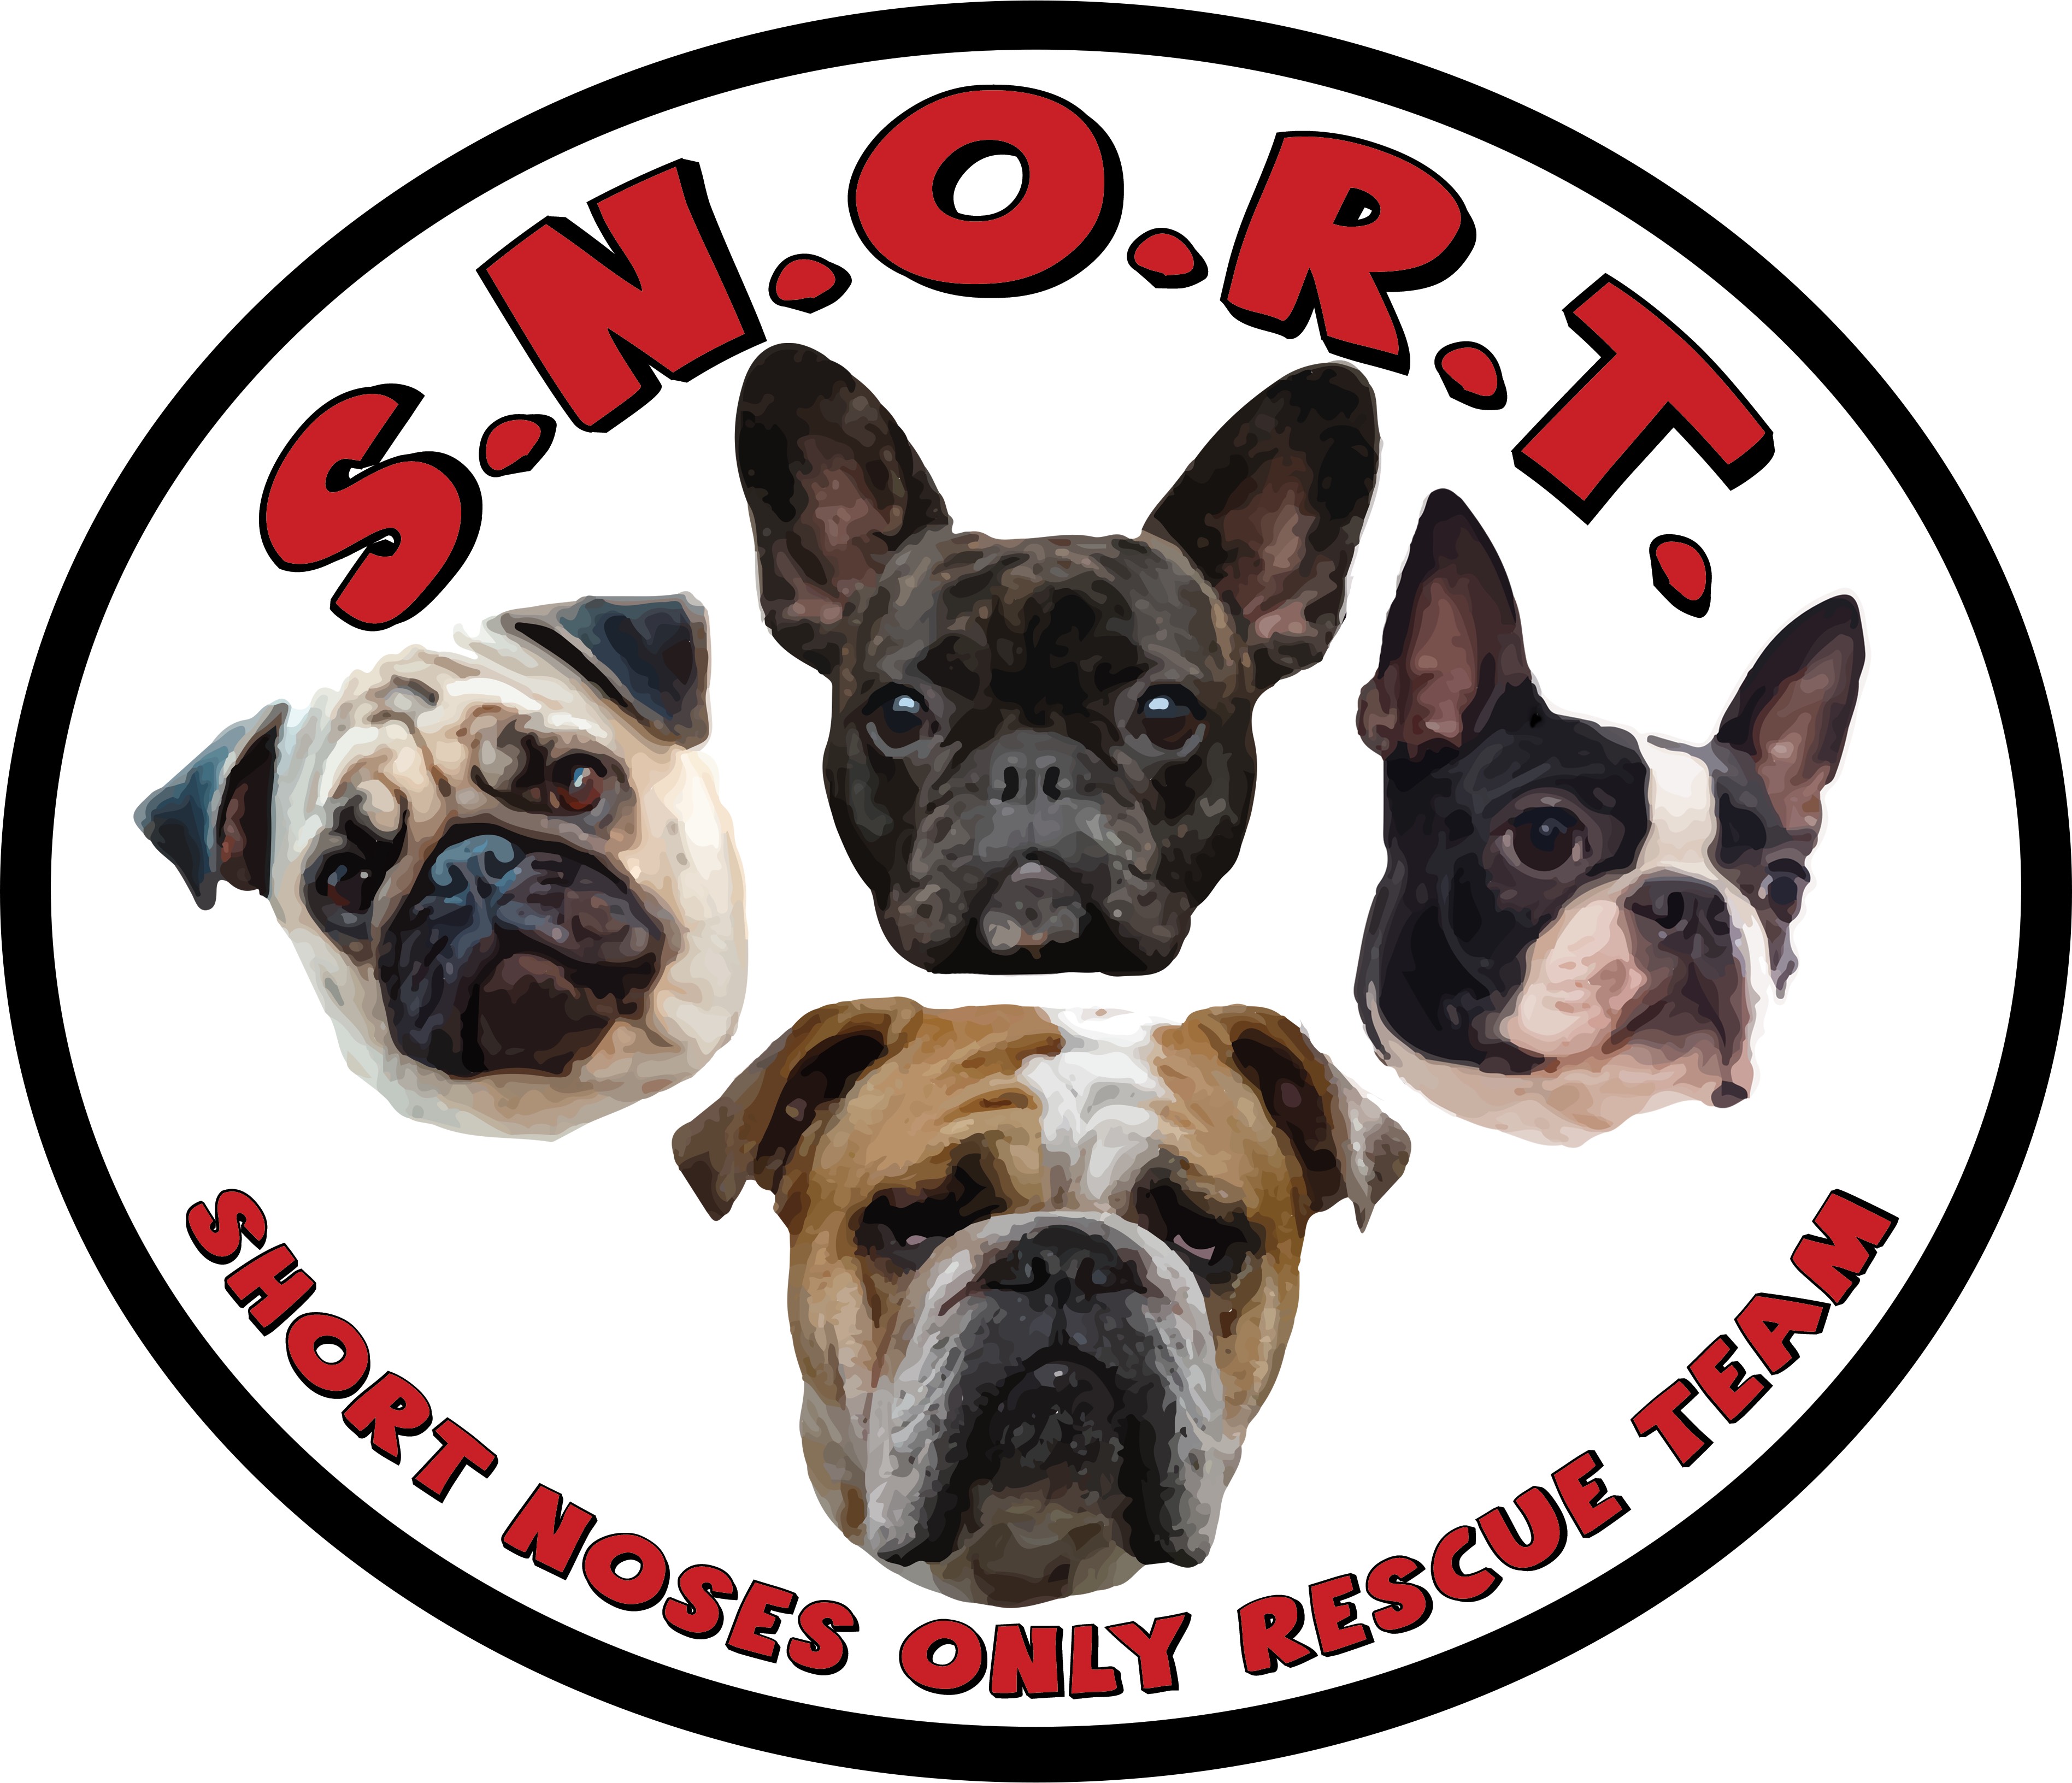 SNORT Rescue "Short Noses Only Rescue Team"